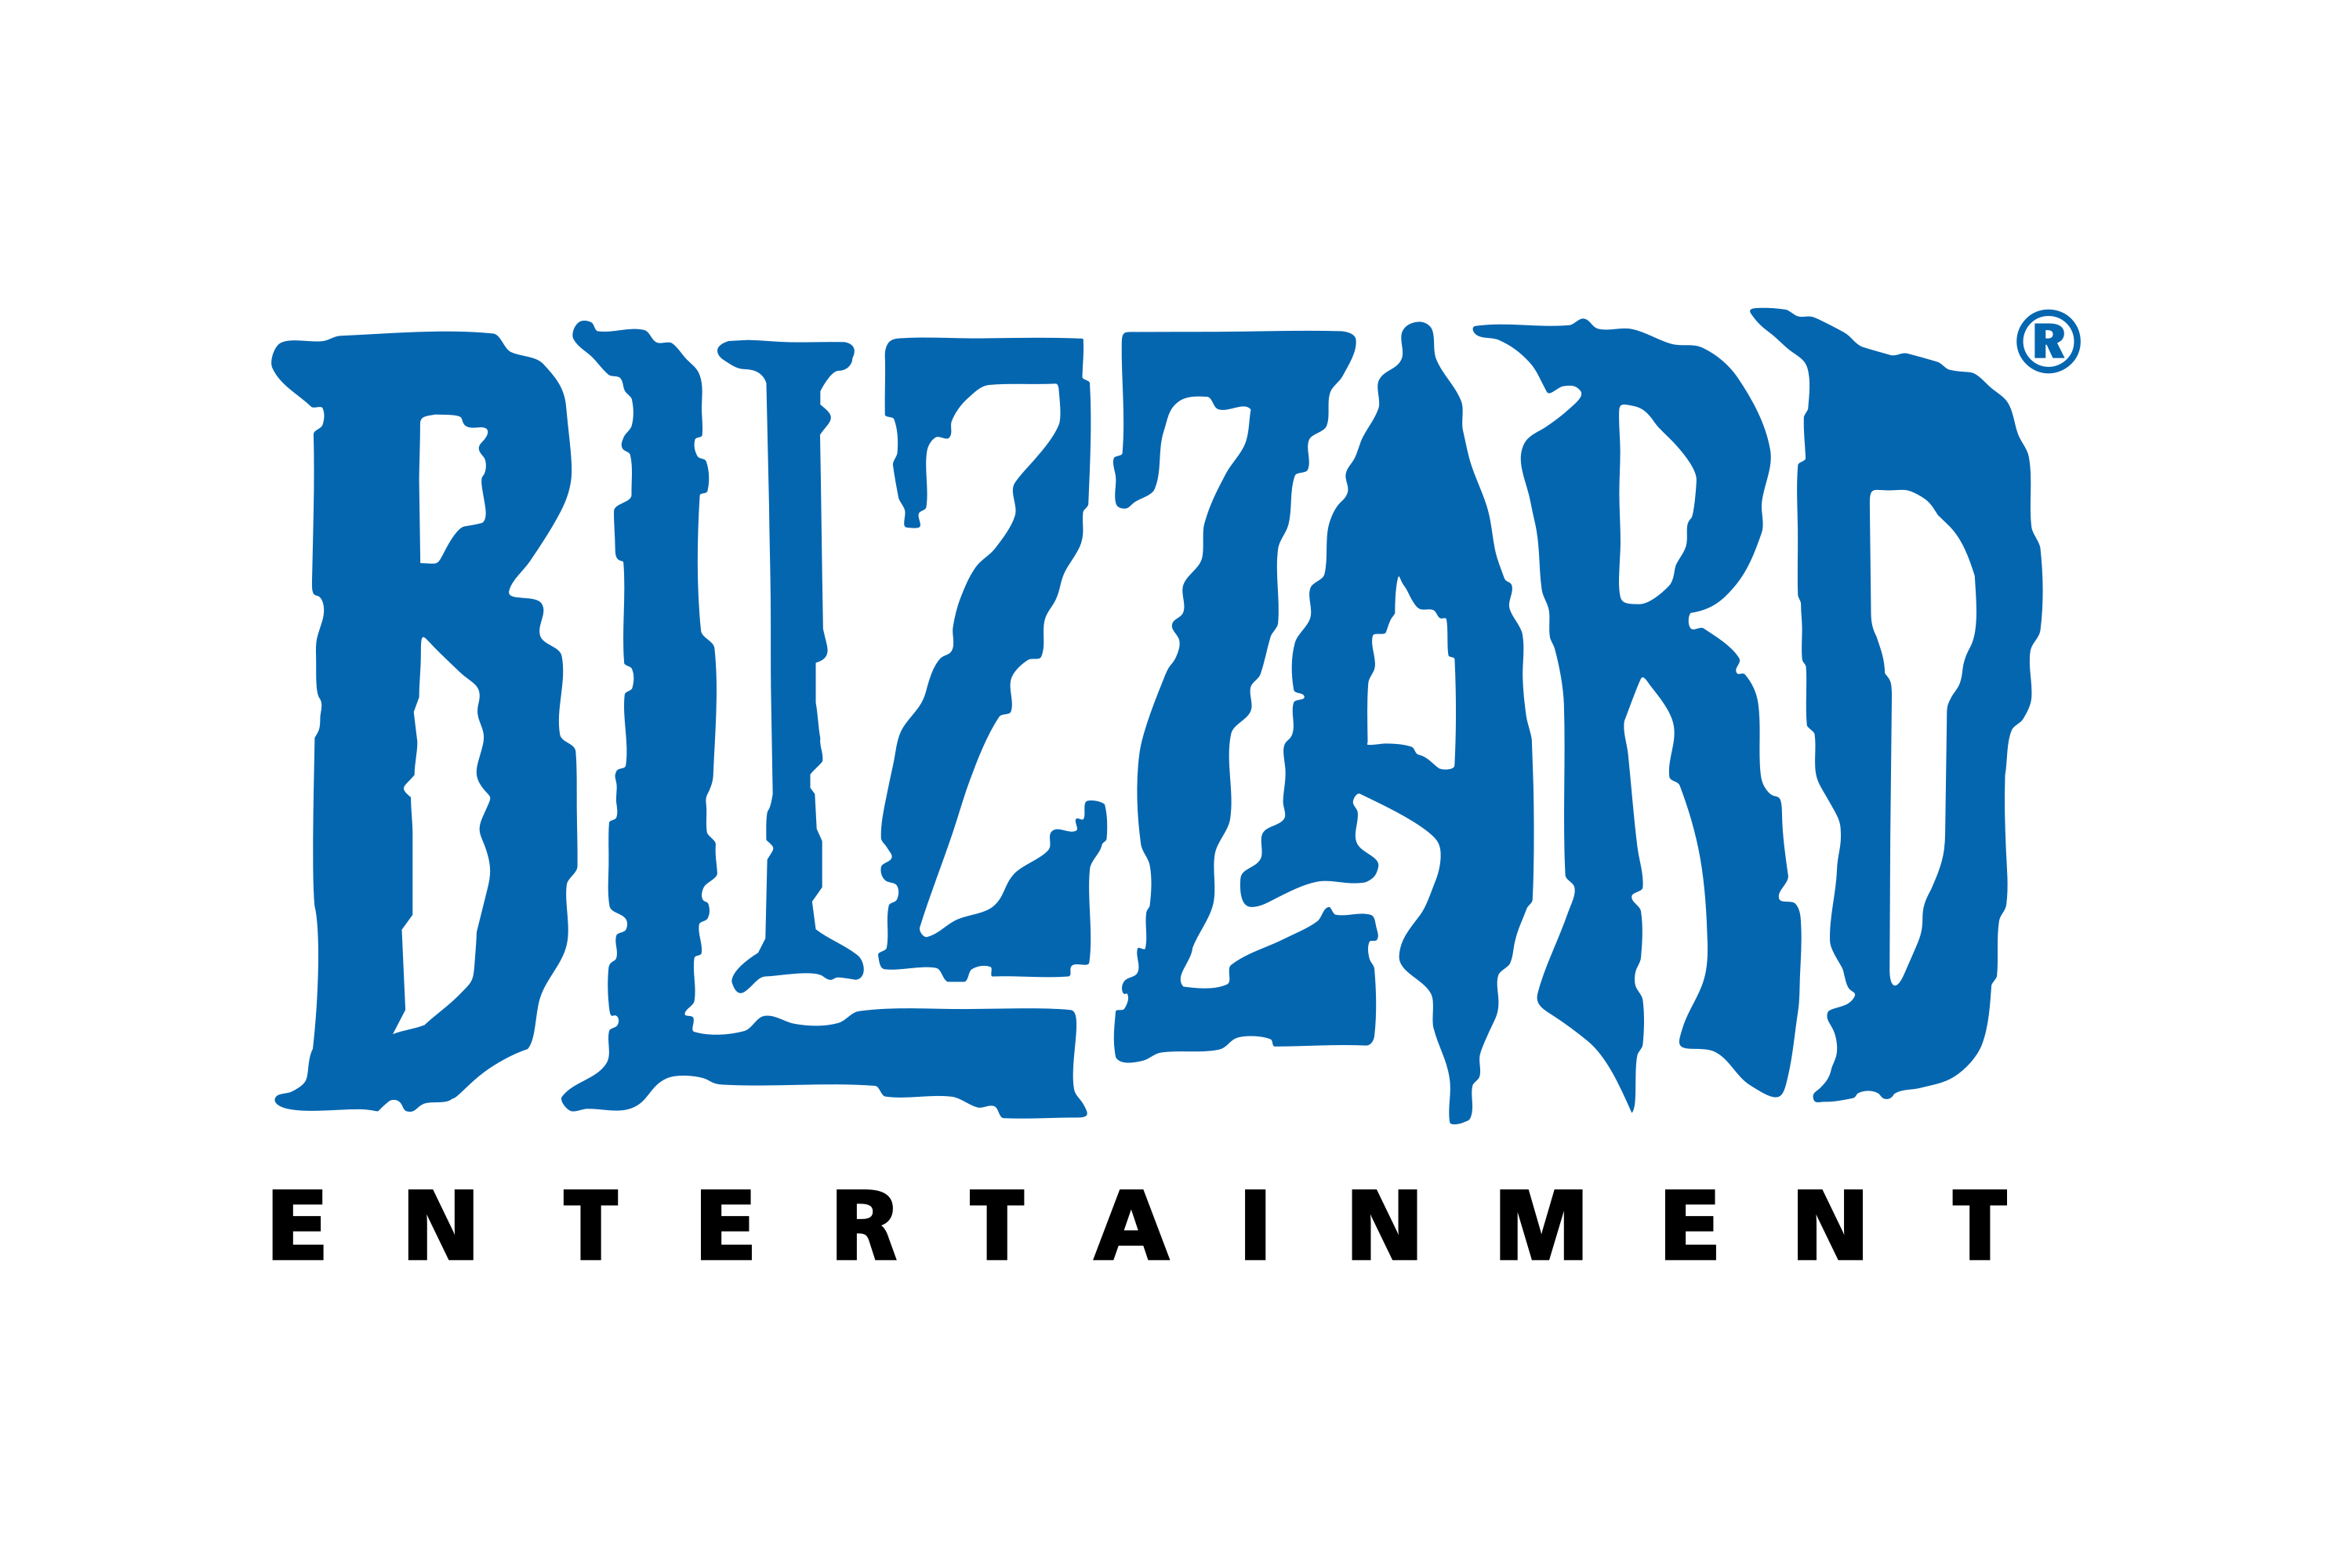 Download Blizzard Entertainment Logo In Svg Vector Or Png File Format Logo Wine